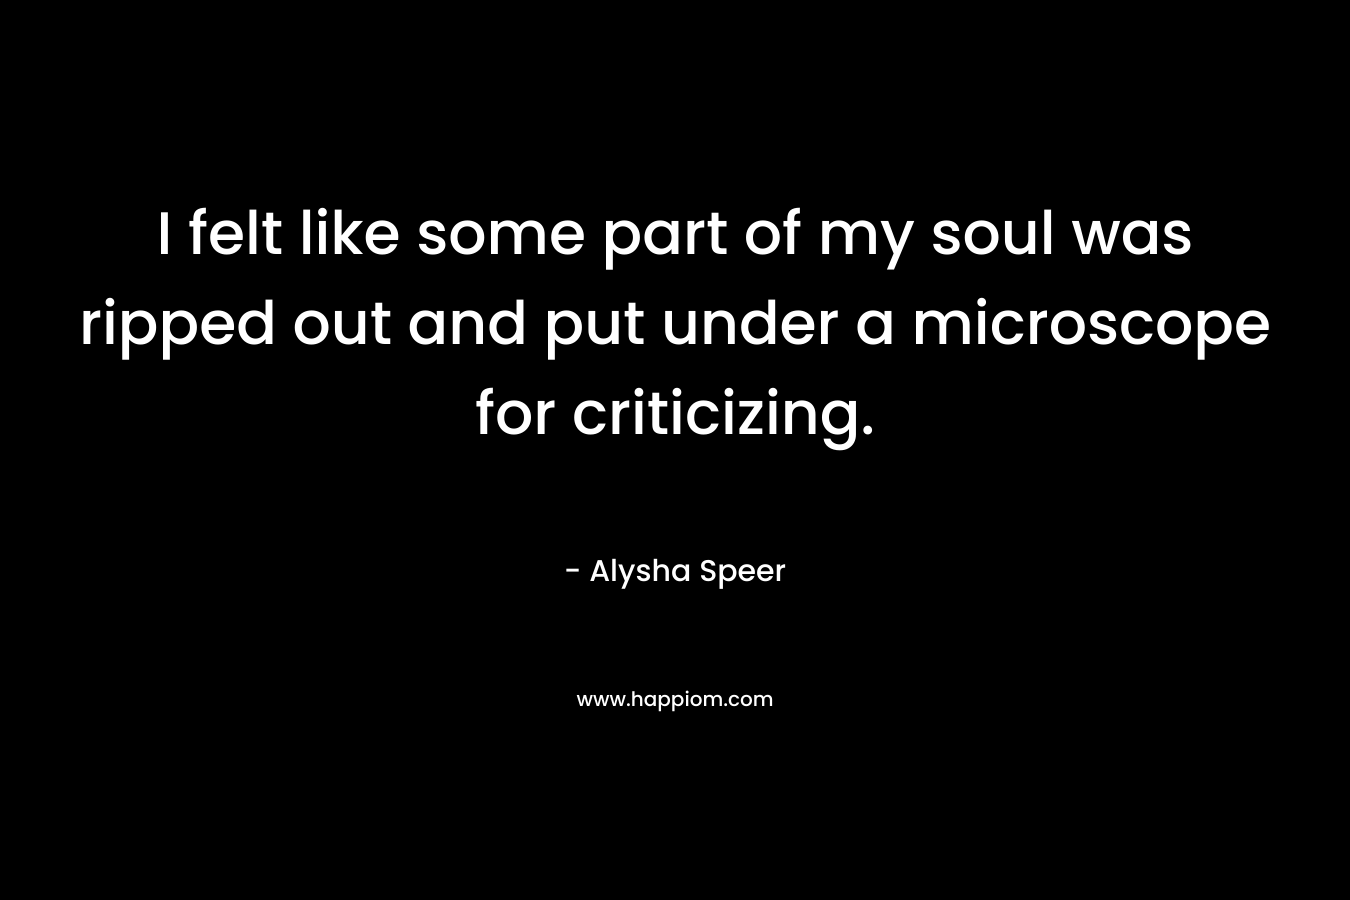 I felt like some part of my soul was ripped out and put under a microscope for criticizing. – Alysha Speer